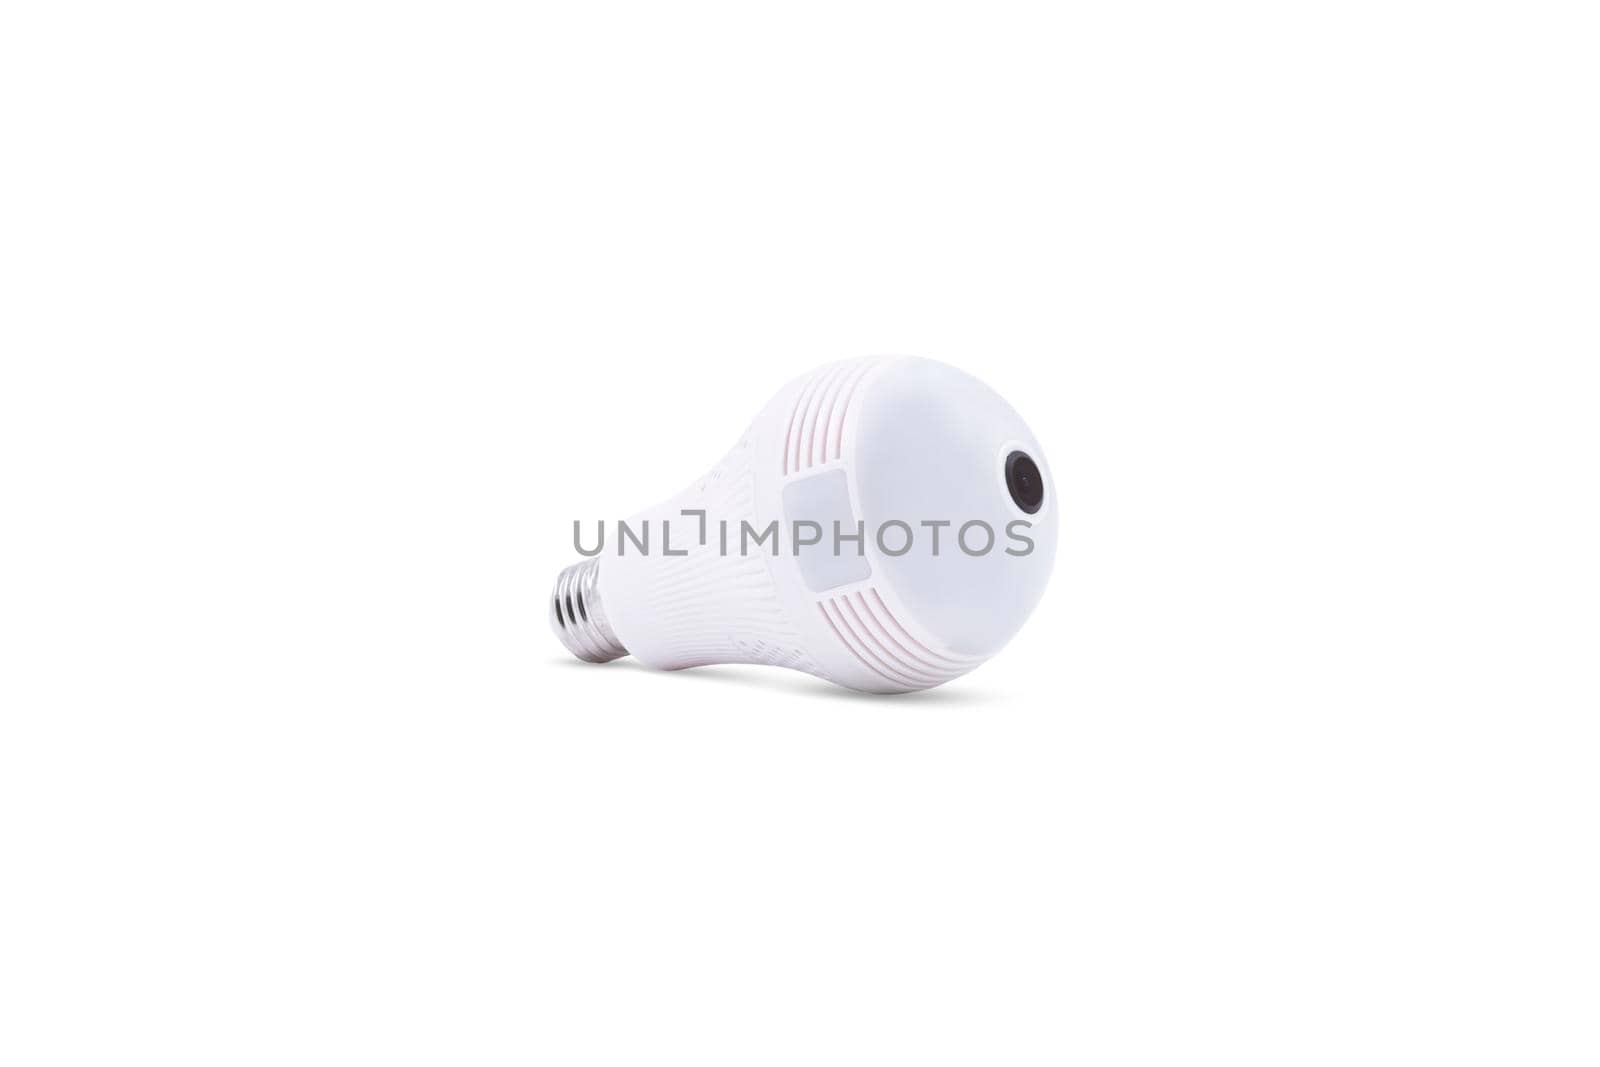 LED light with built-in camera can view images online with the app on white background.